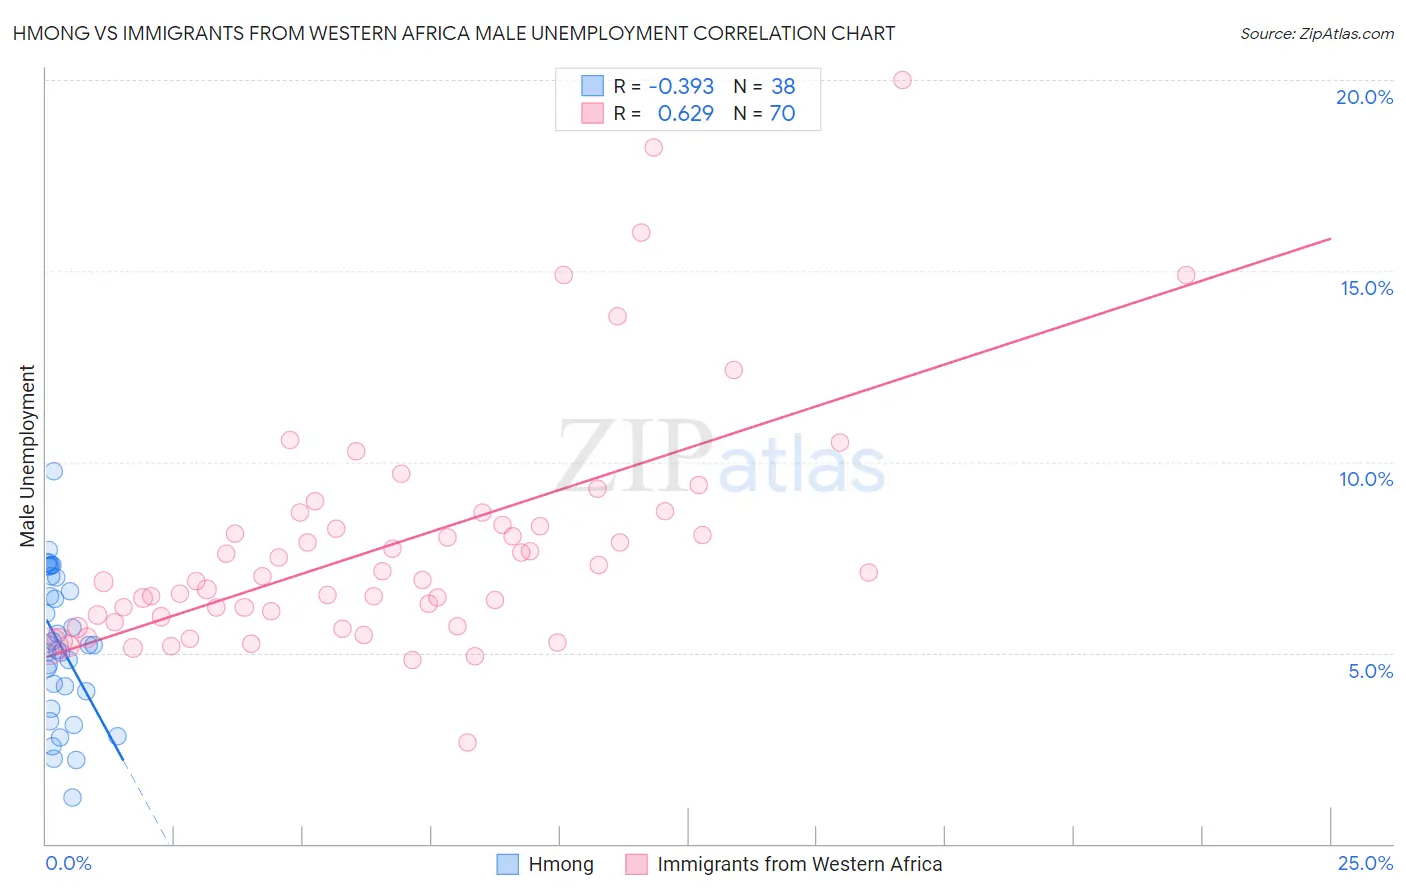 Hmong vs Immigrants from Western Africa Male Unemployment